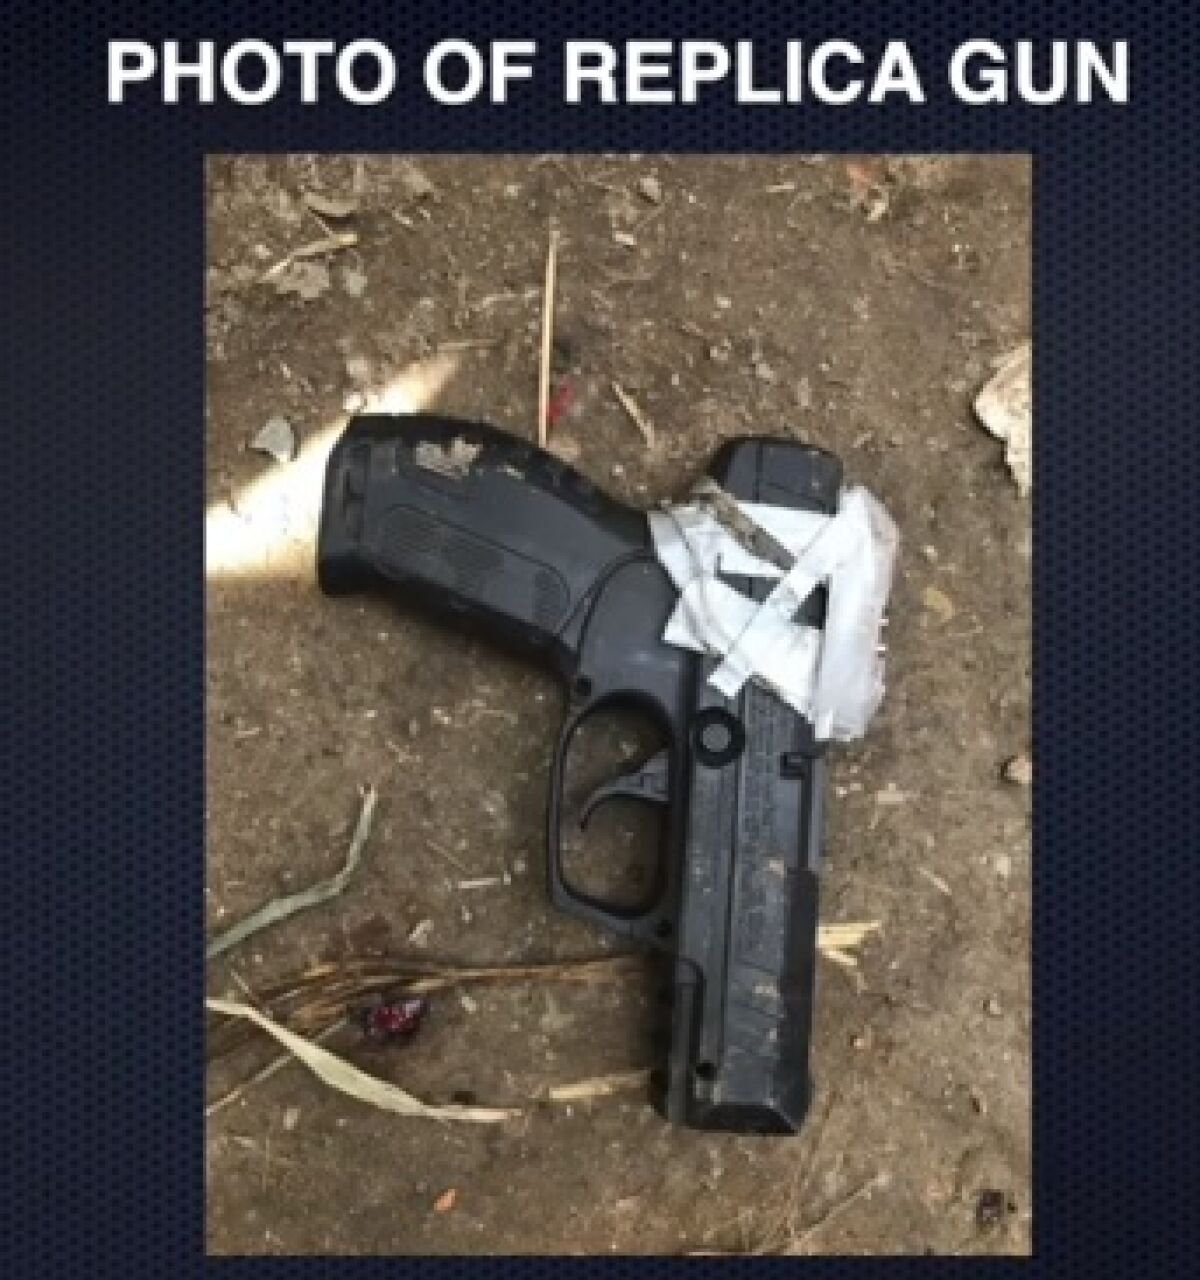 Police said Carlos Soto, 70, had this replica gun with him moments before he was shot Feb. 27 in Otay Mesa. Body-worn camera footage showed Soto tossed the item on the ground at nearly the same moment officers opened fire.